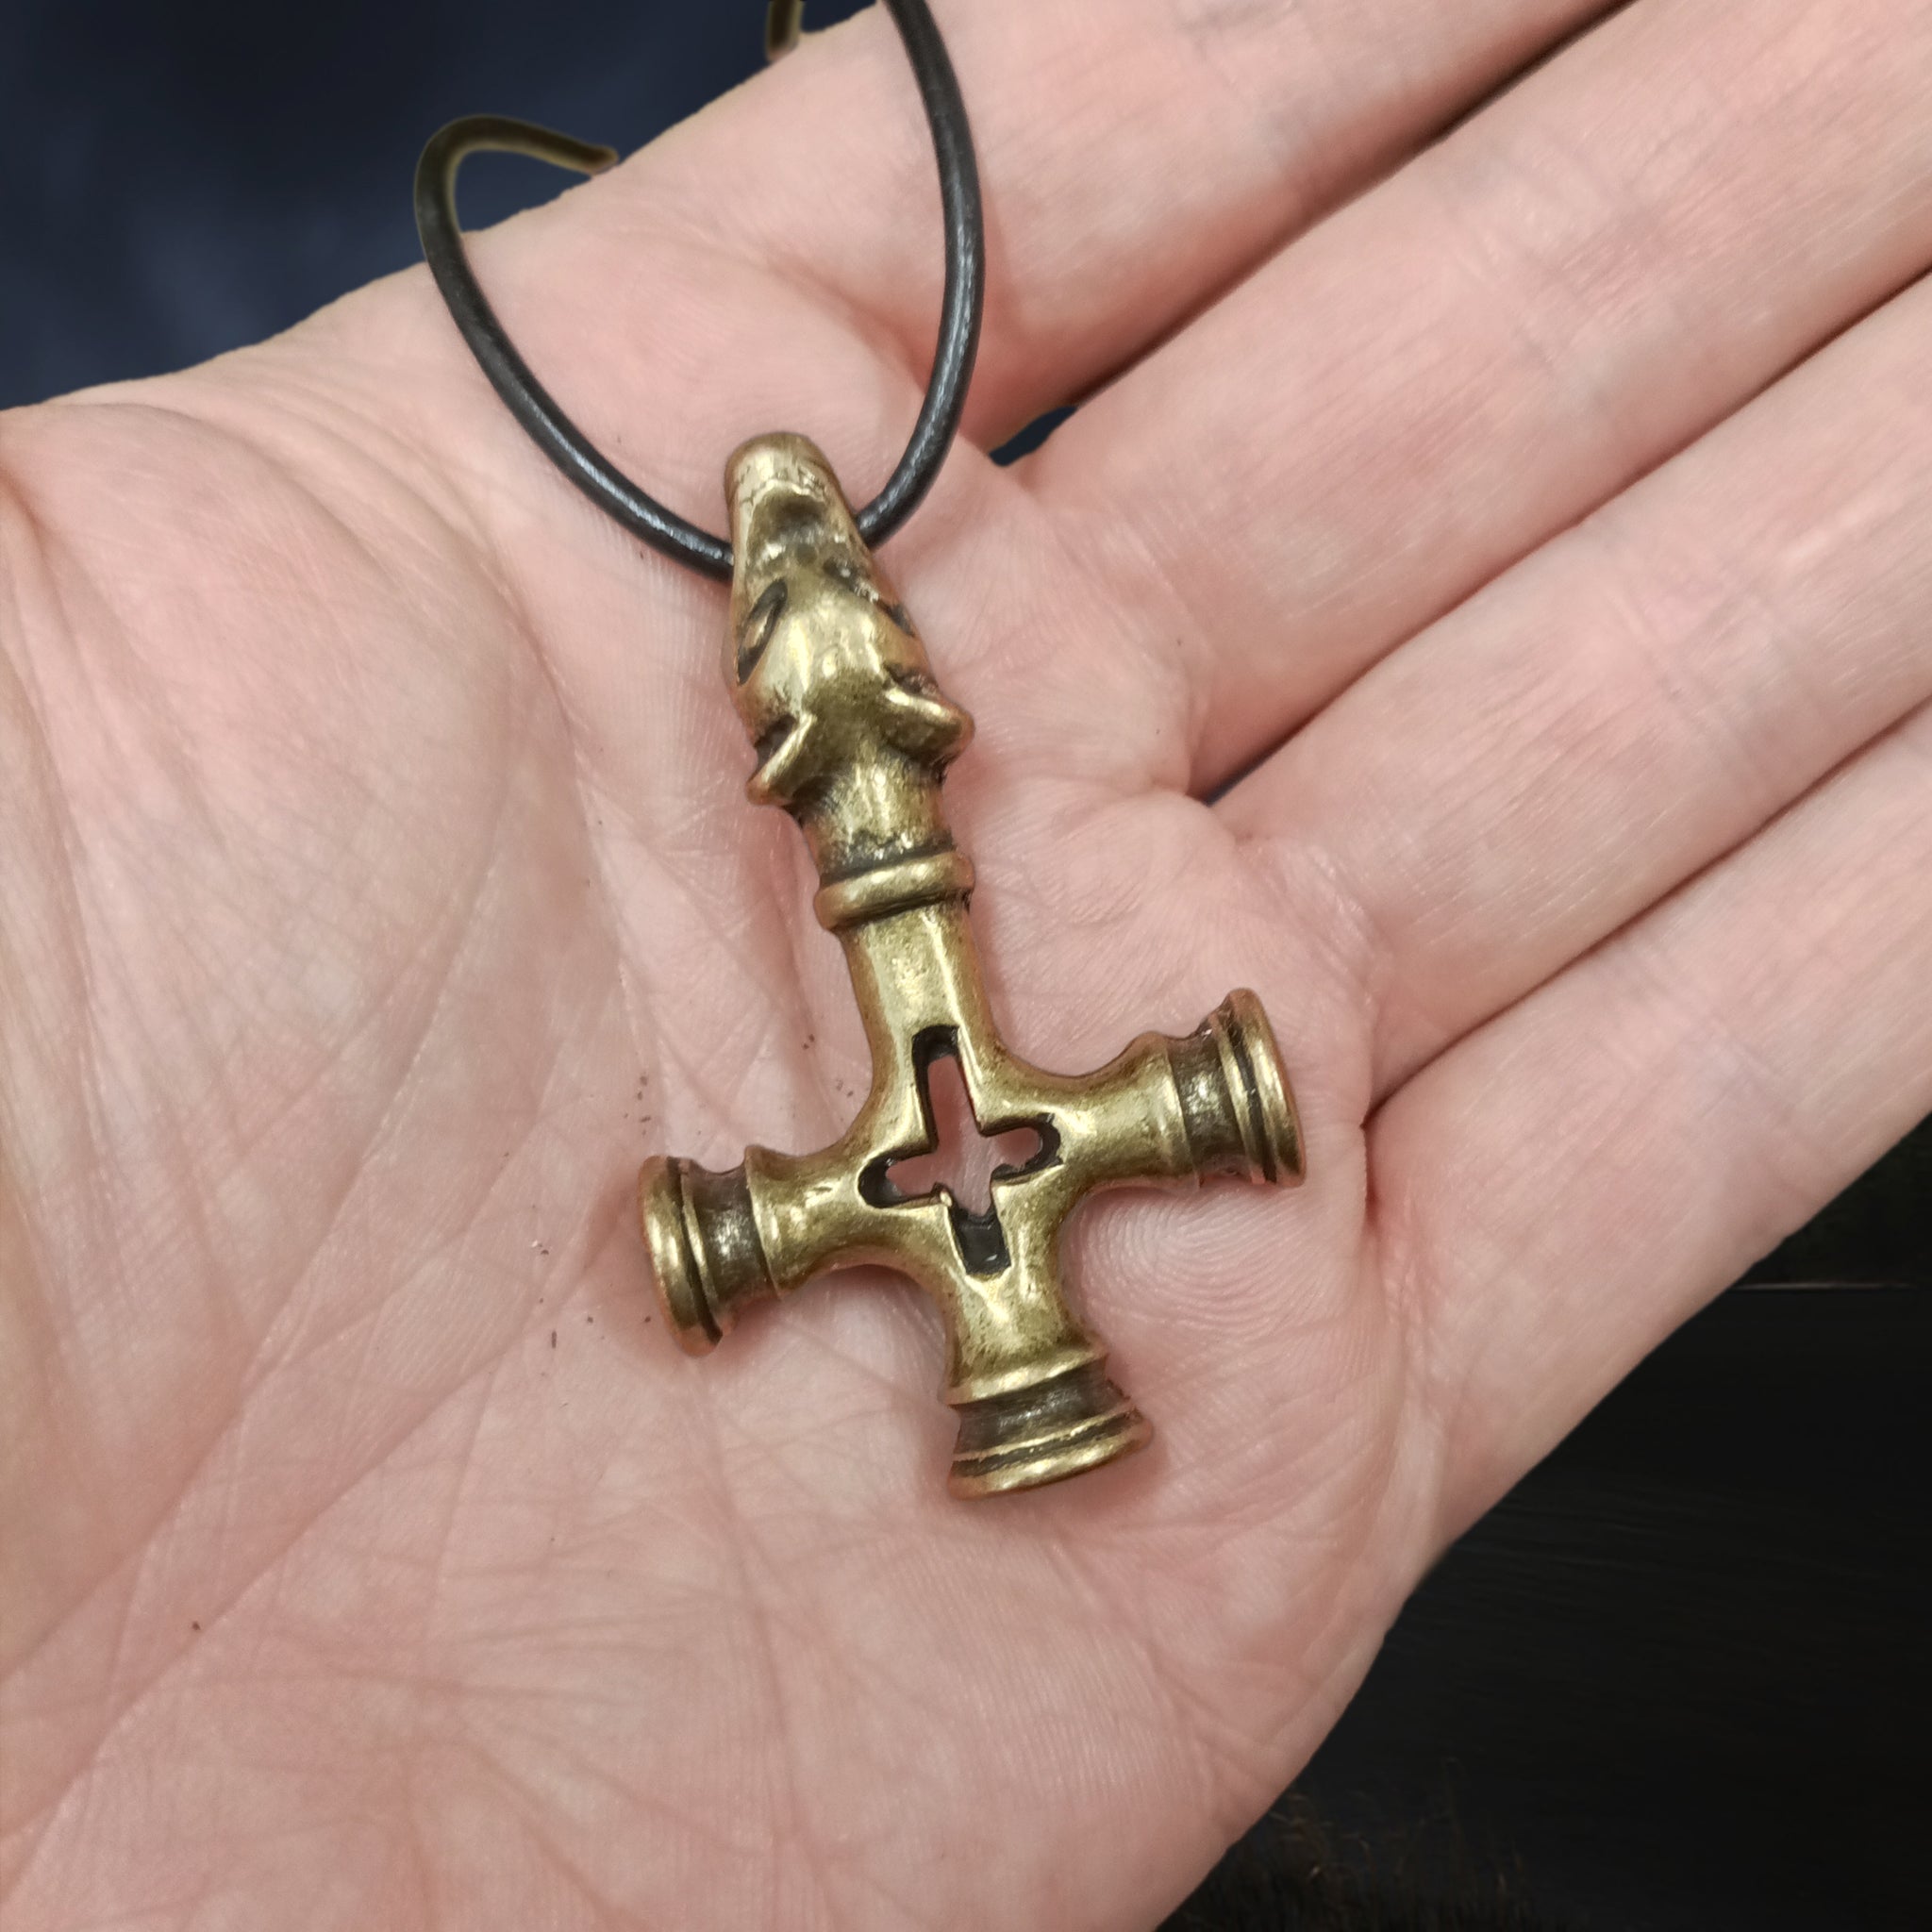 Large Brass Replica of the Original Icelandic Thor's Hammer Cross Pendant, from Foss, Iceland - 11th Century on Leather Cord on Hand